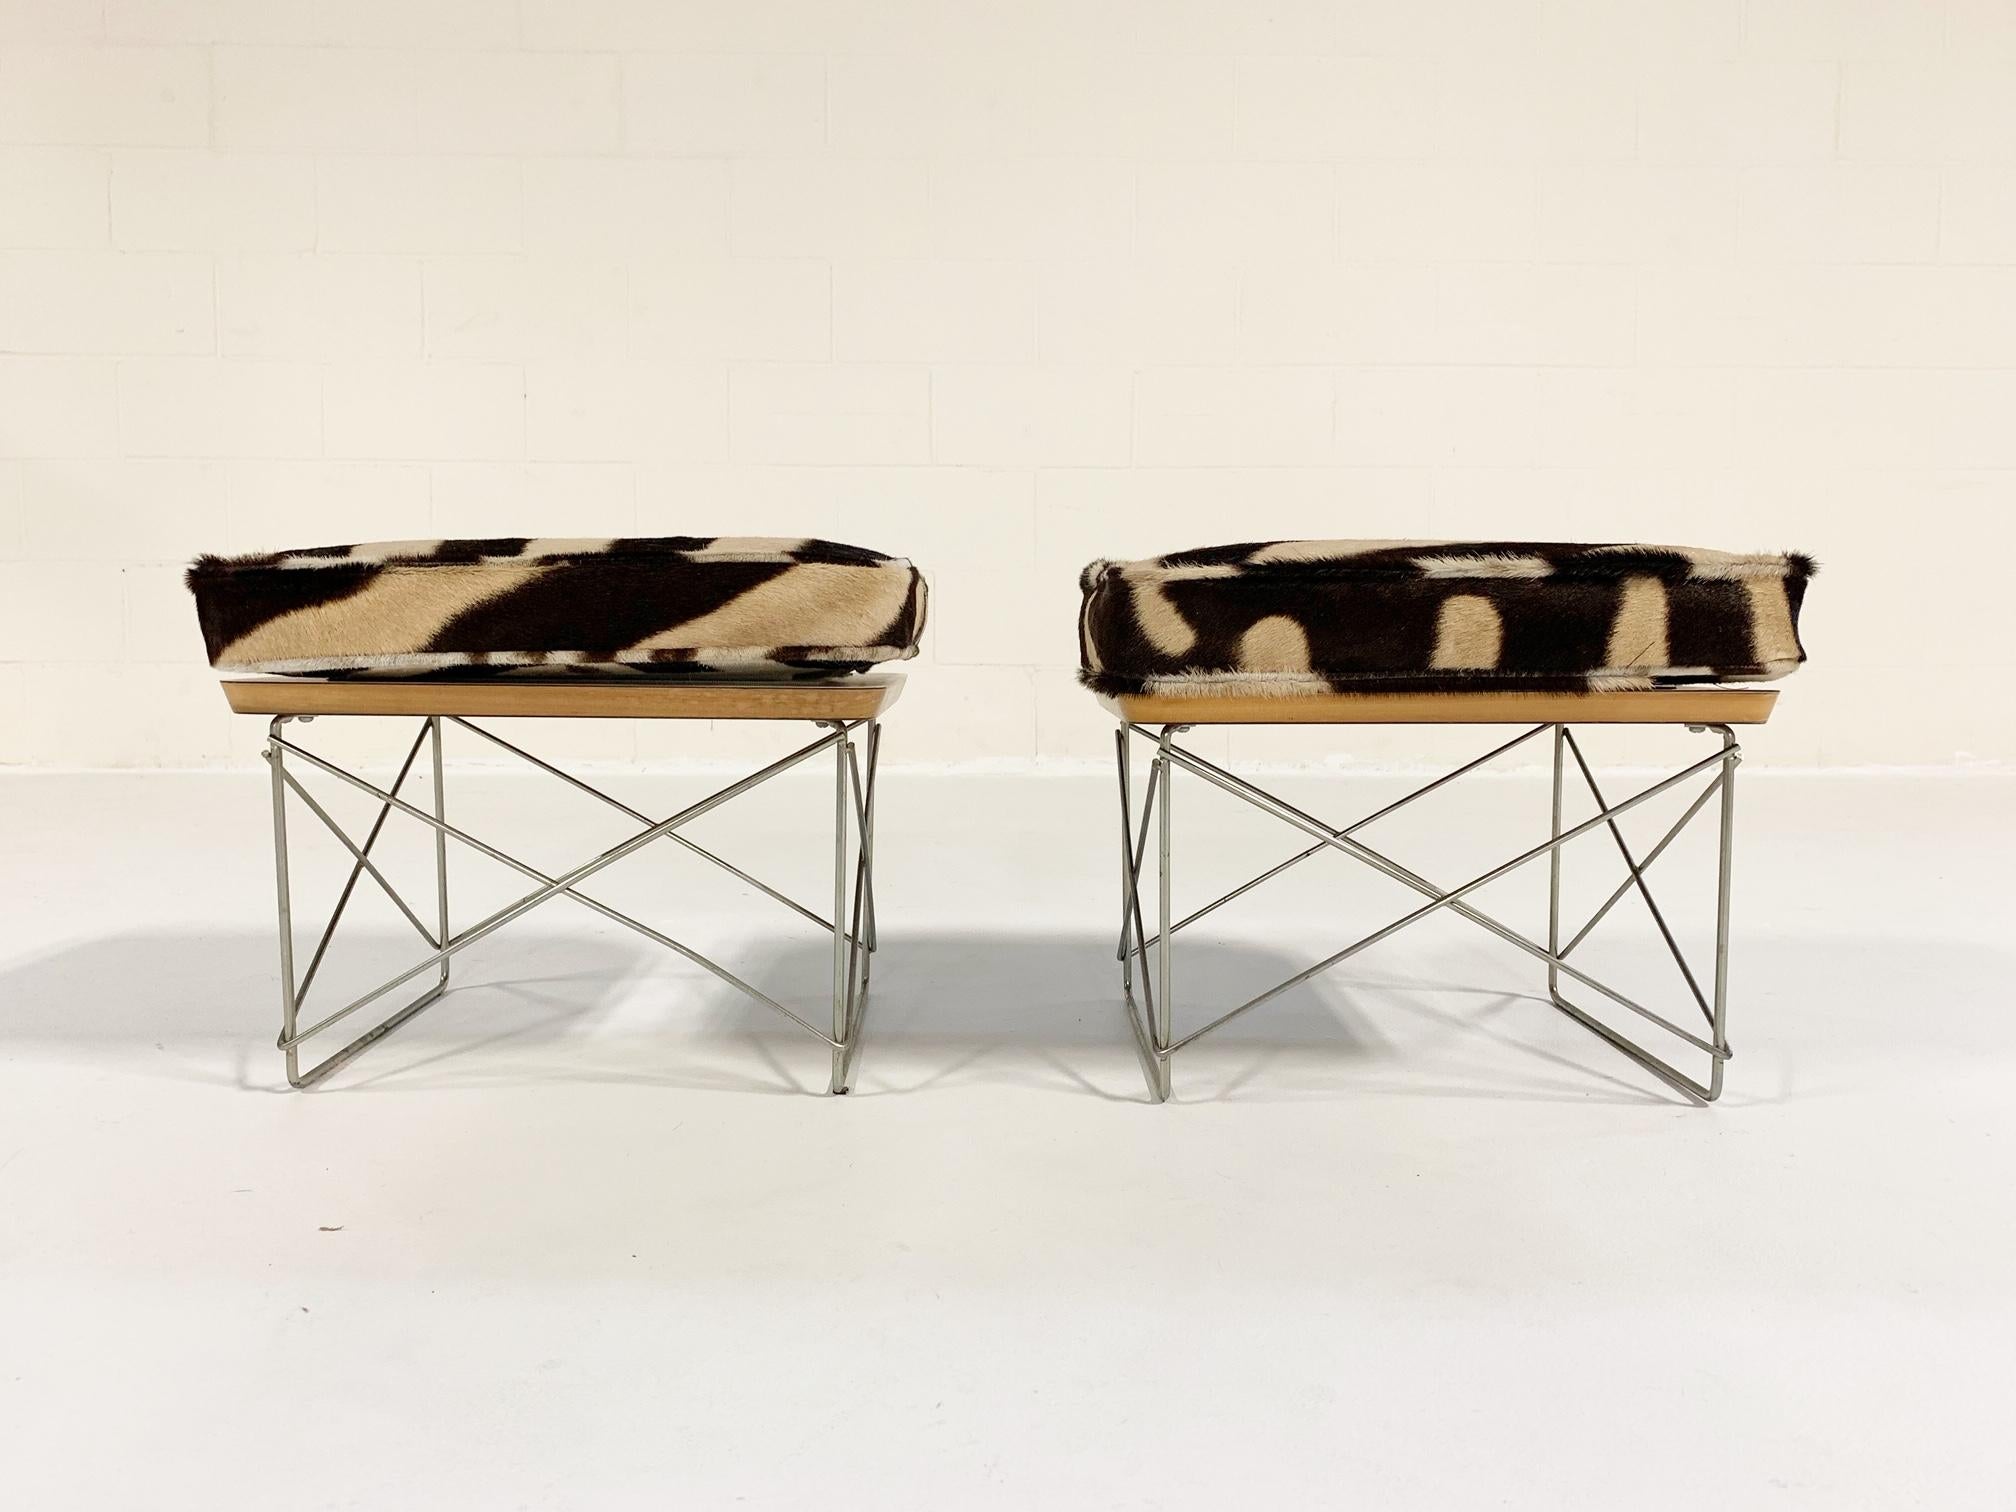 American Charles and Ray Eames Ltr Tables with Zebra Cushions, Pair